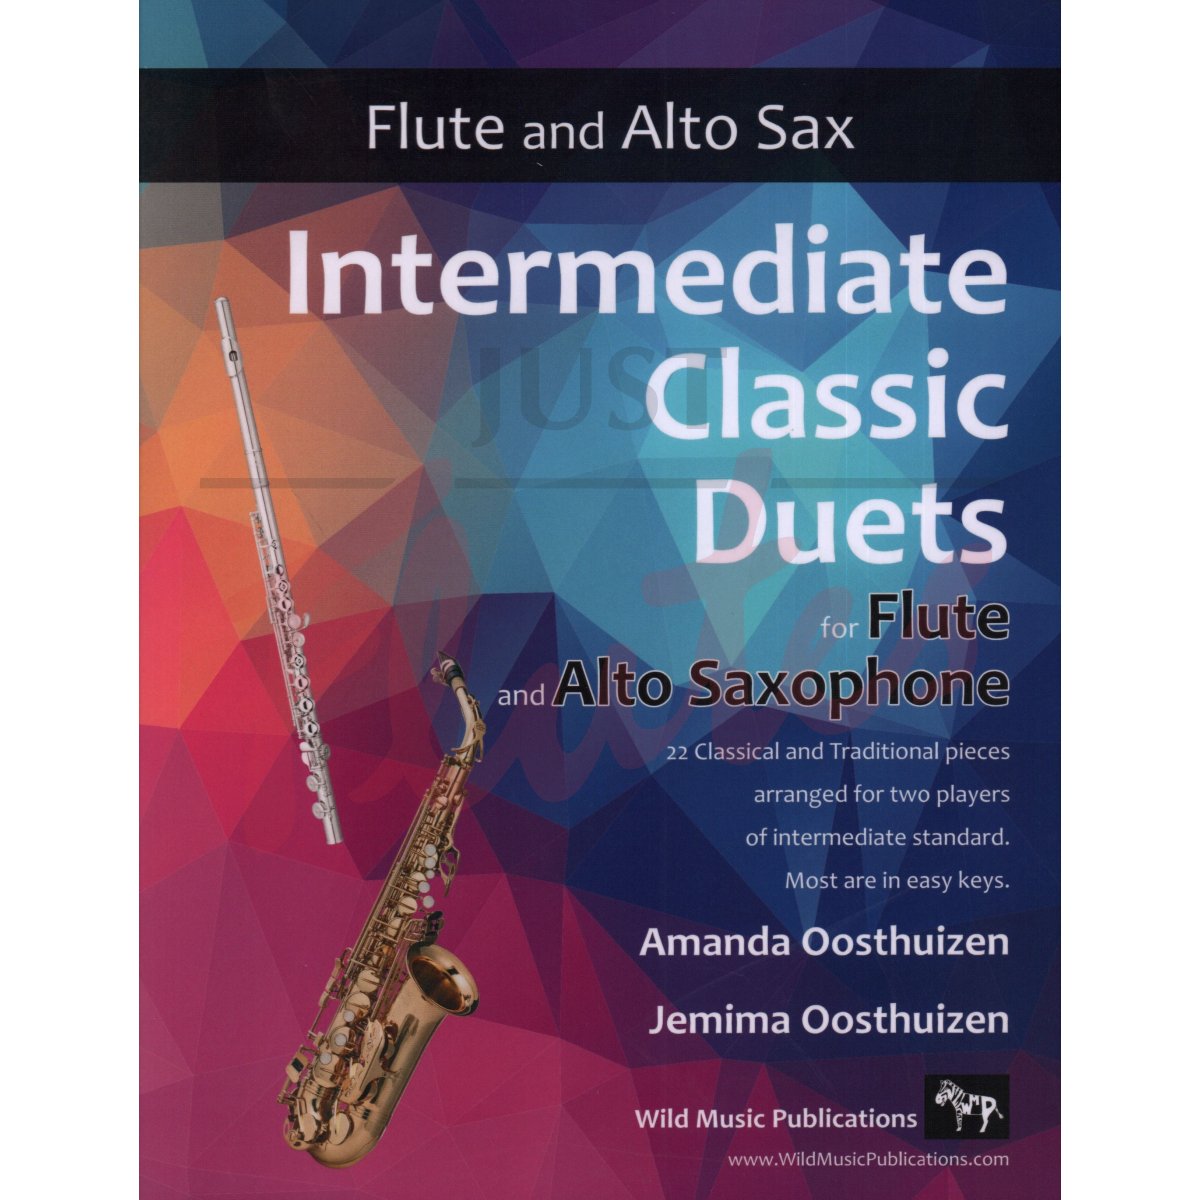 Intermediate Classic Duets for Flute and Alto Saxophone